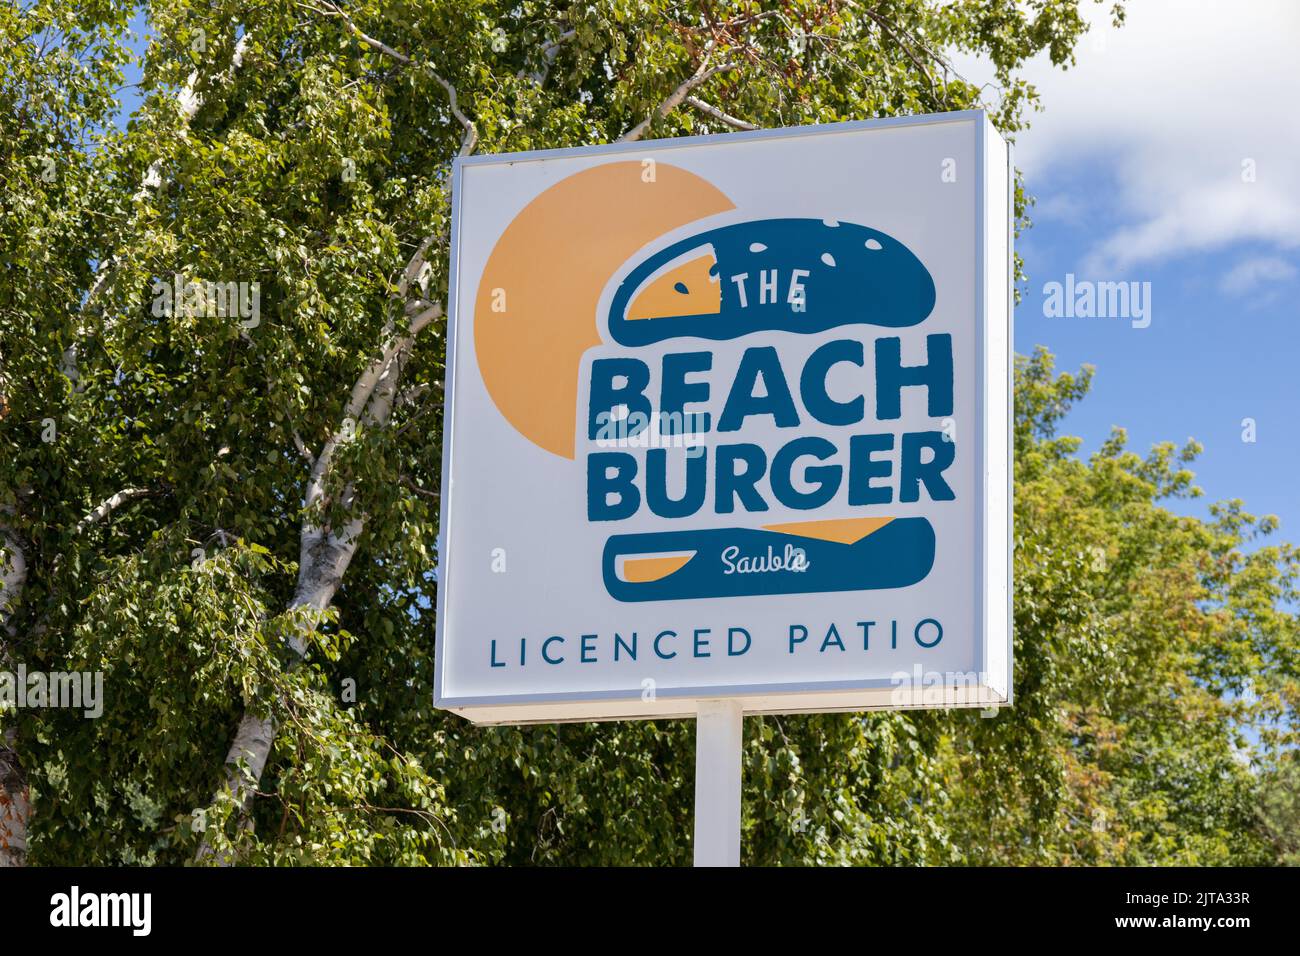 The Beach Burger Restaurant Sign In Sauble Beach Ontario Canada, Burger Restaurant Fast Food Sign Stock Photo